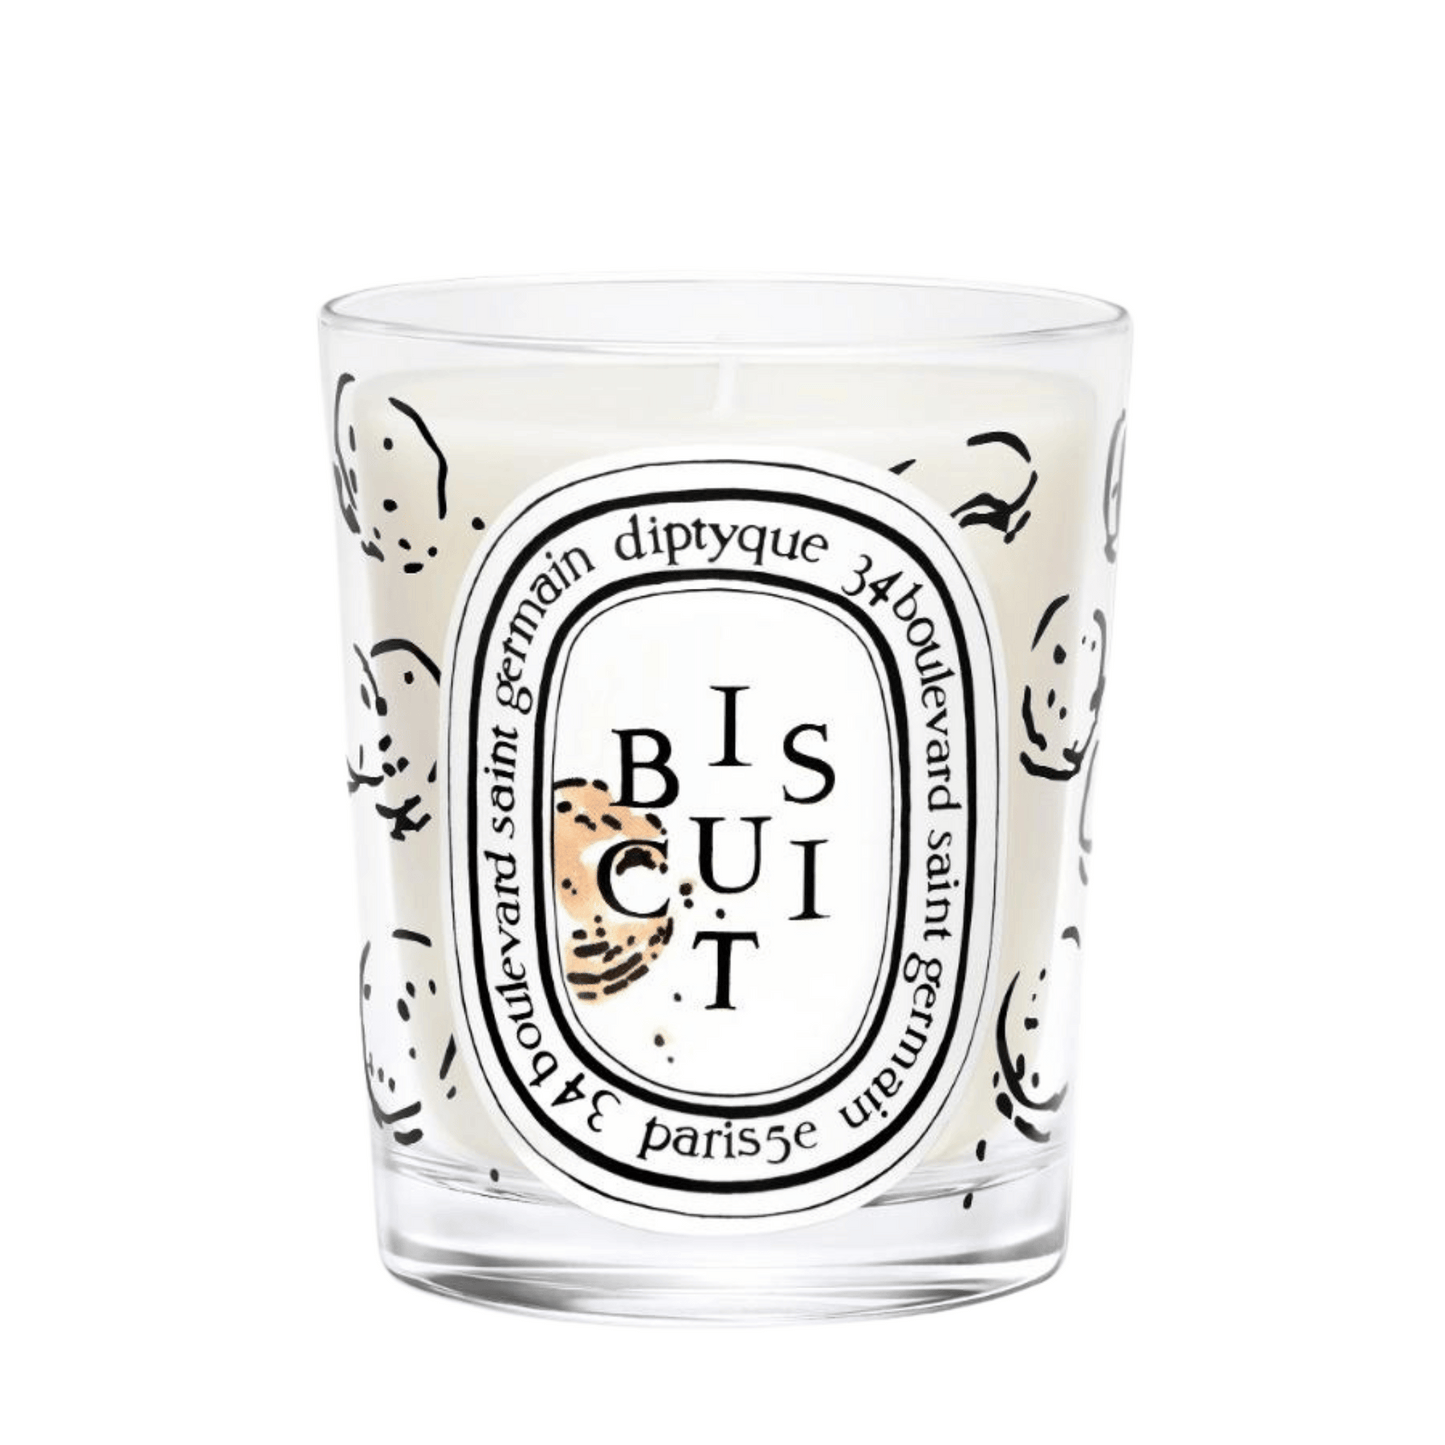 Primary Image of Biscuit Candle